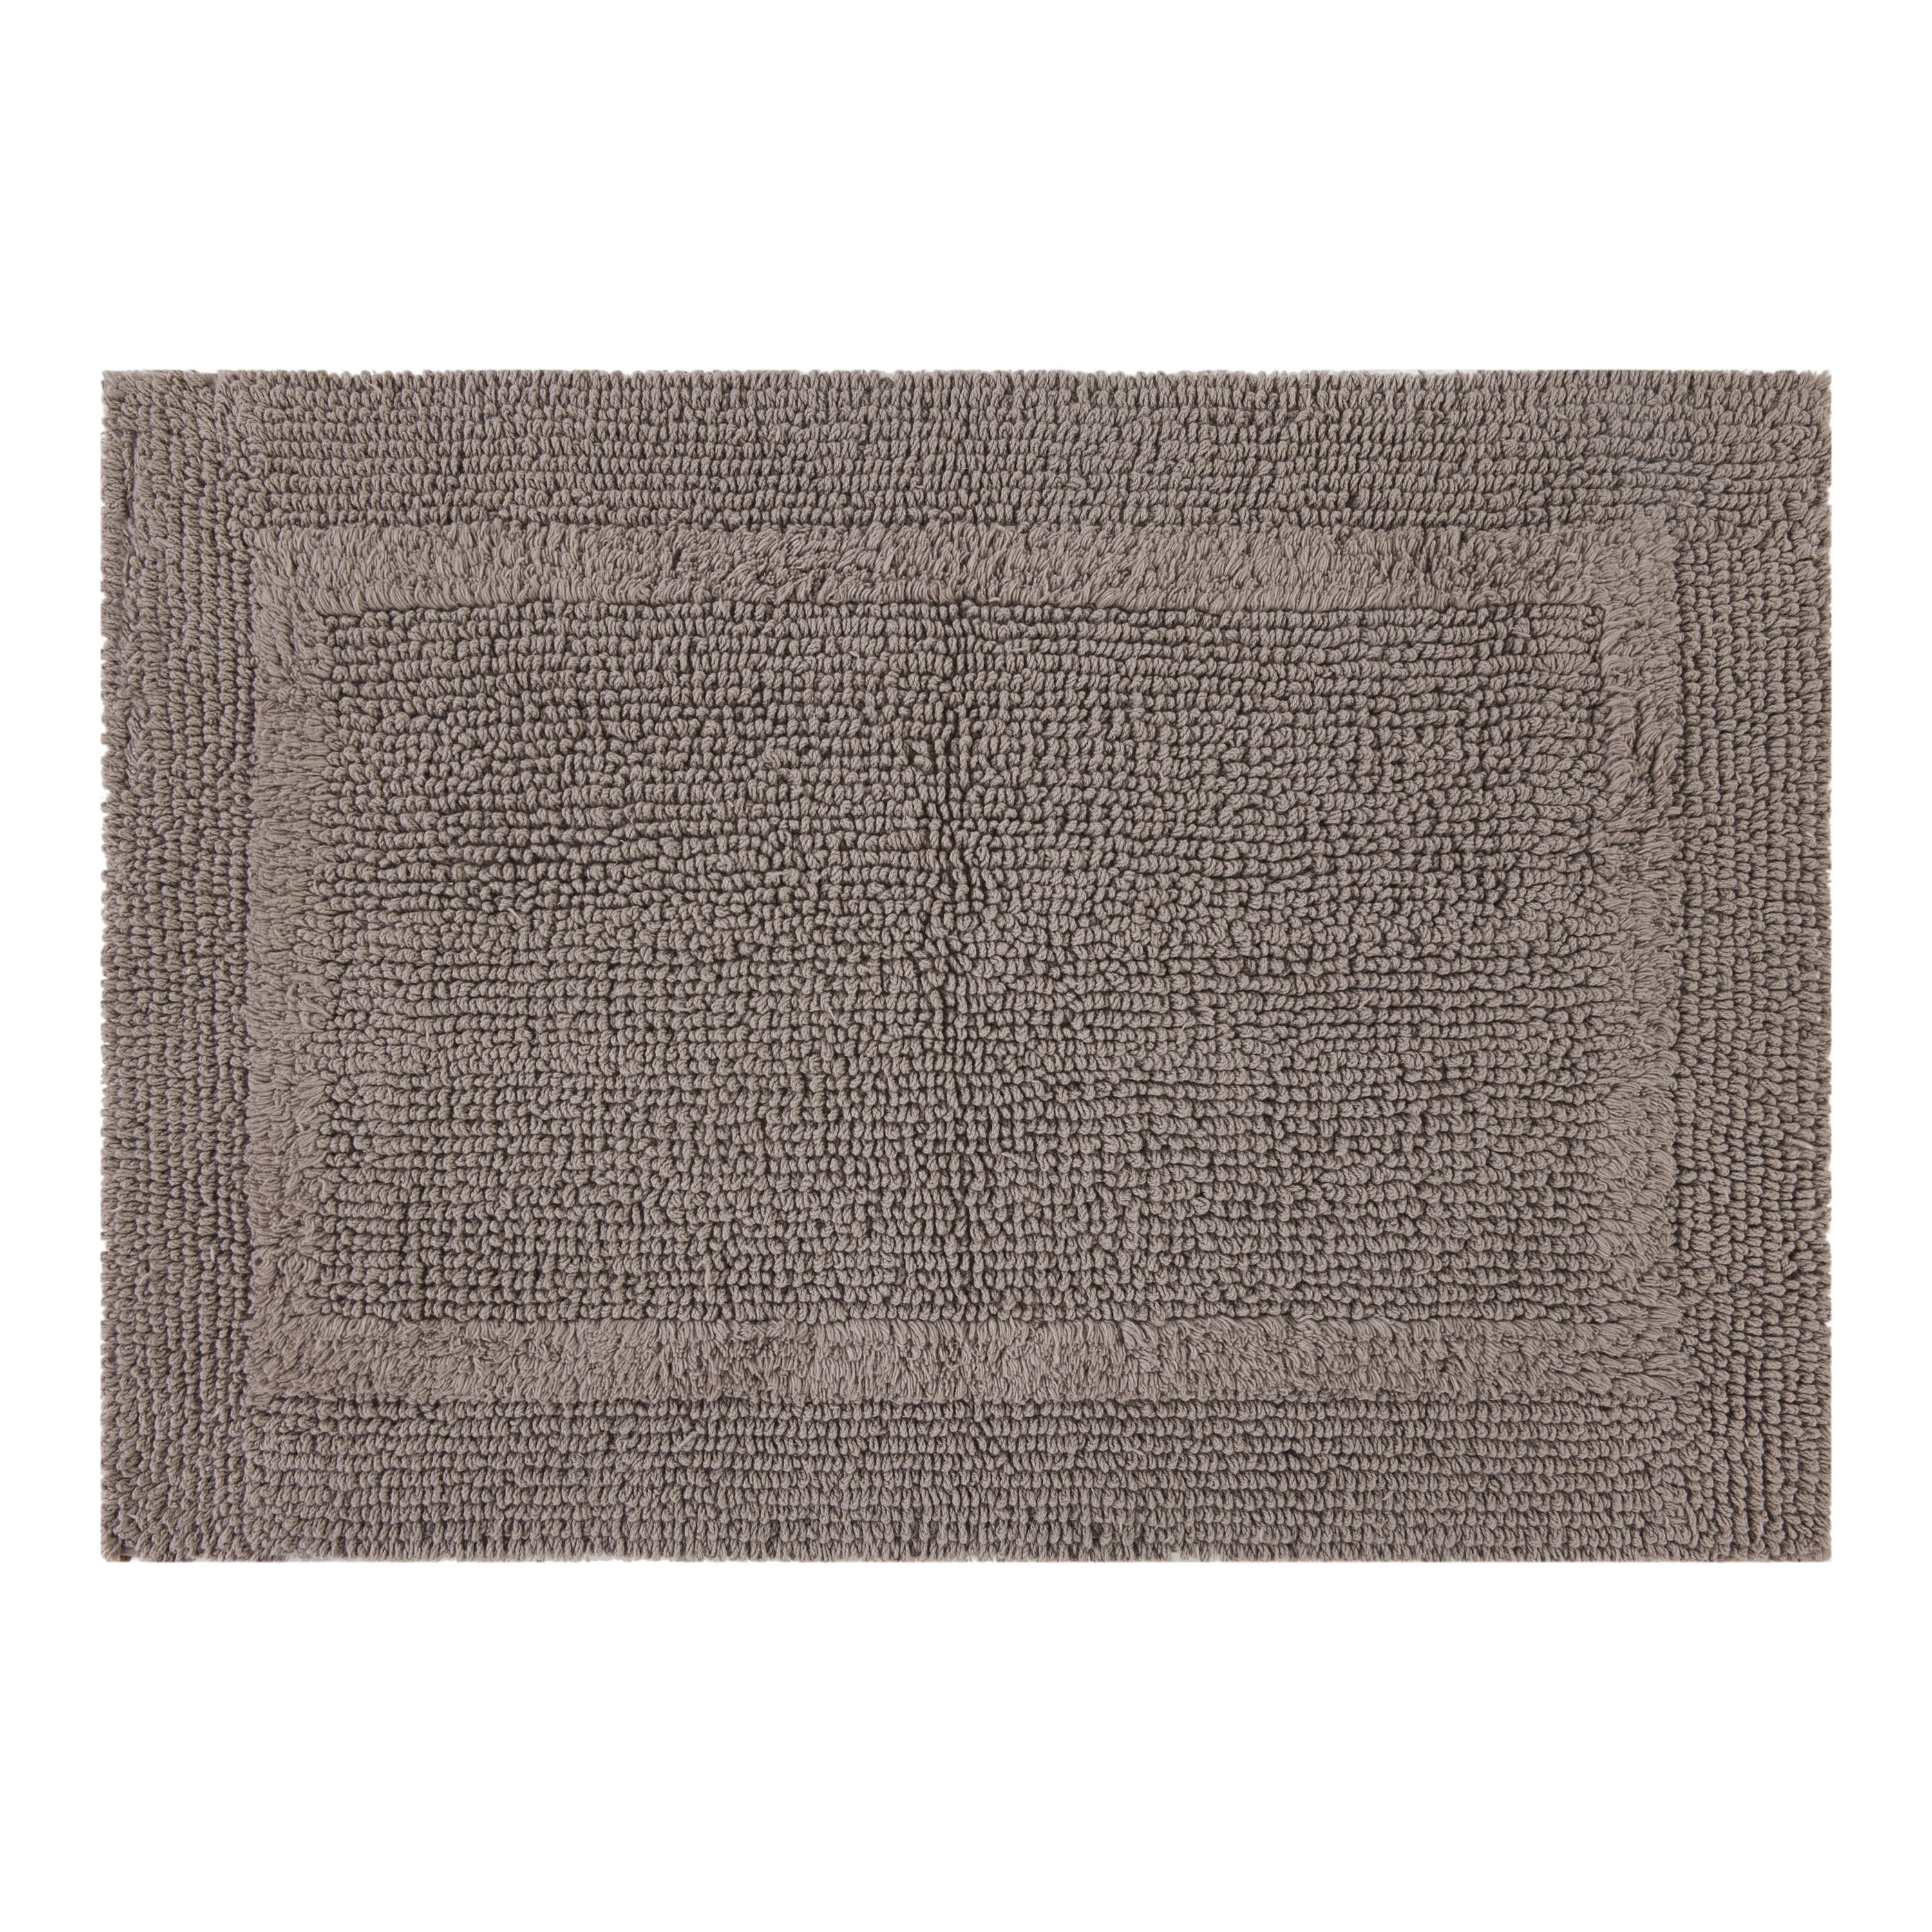 Better Homes & Gardens Cotton Reversible Washable Bath Rug, 17 inch x 24 inch, Taupe Splash